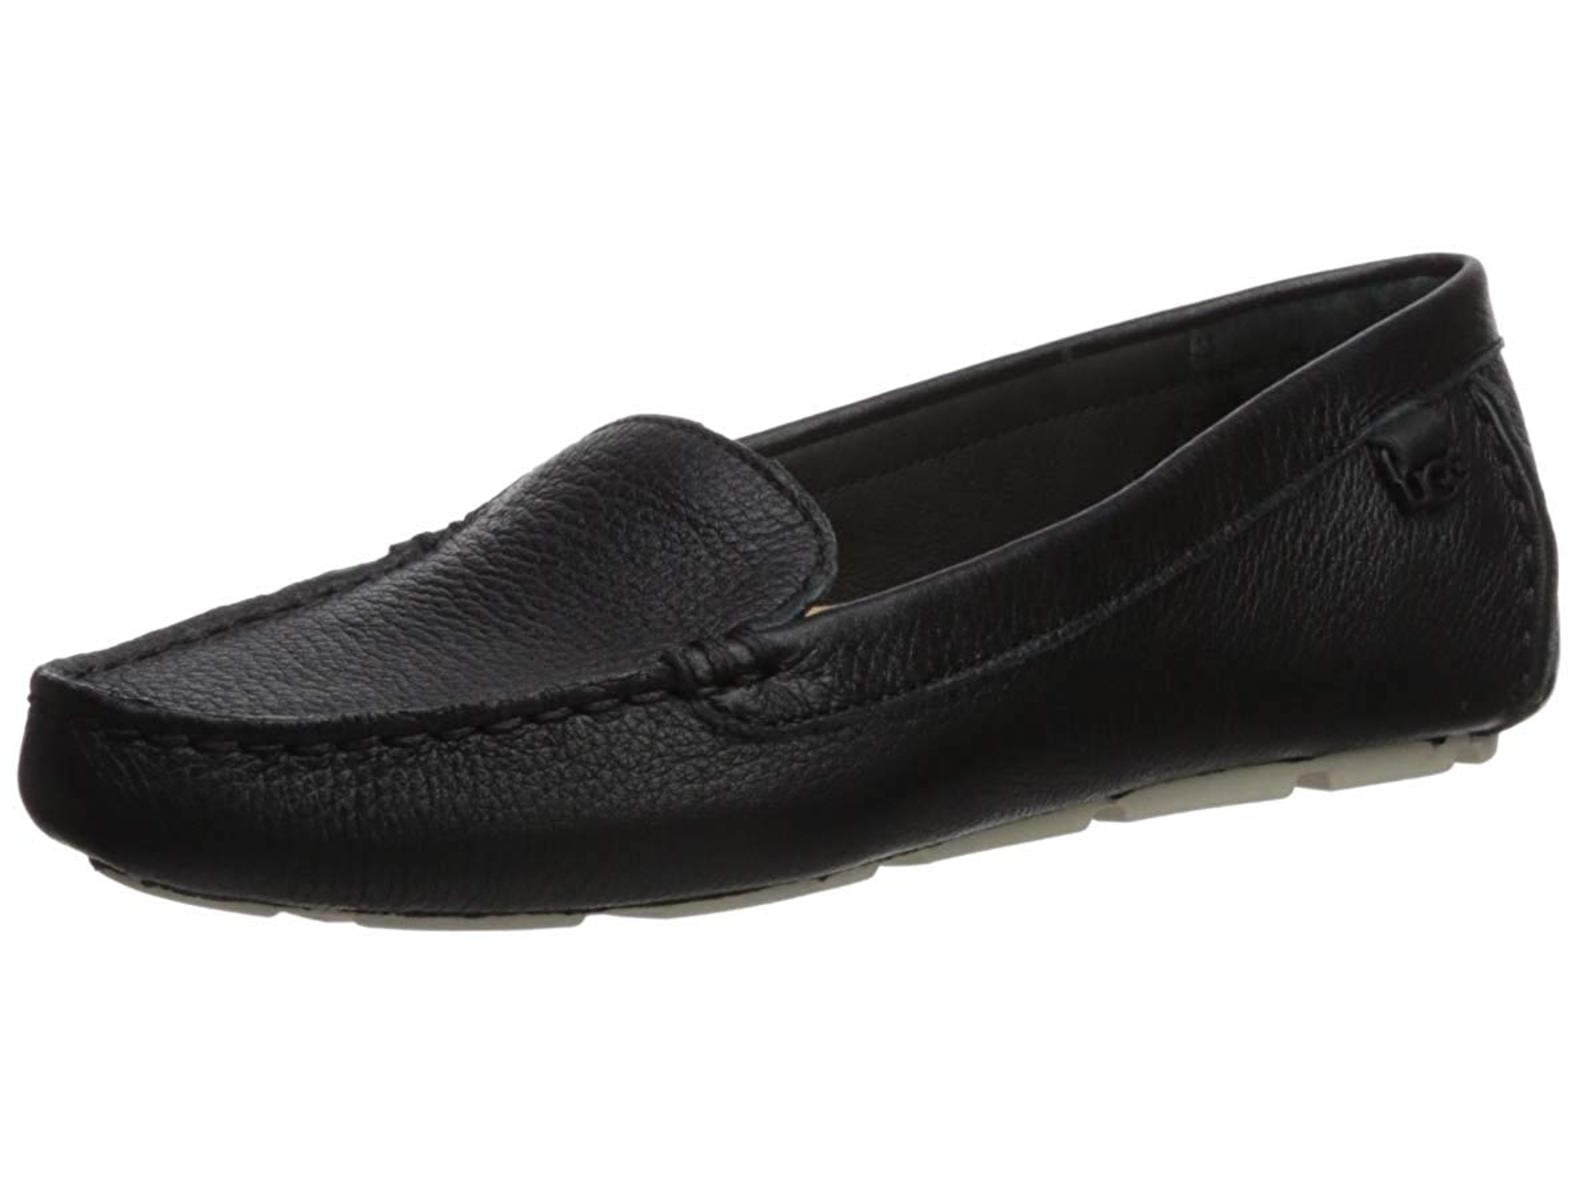 ugg women's flores driving style loafer